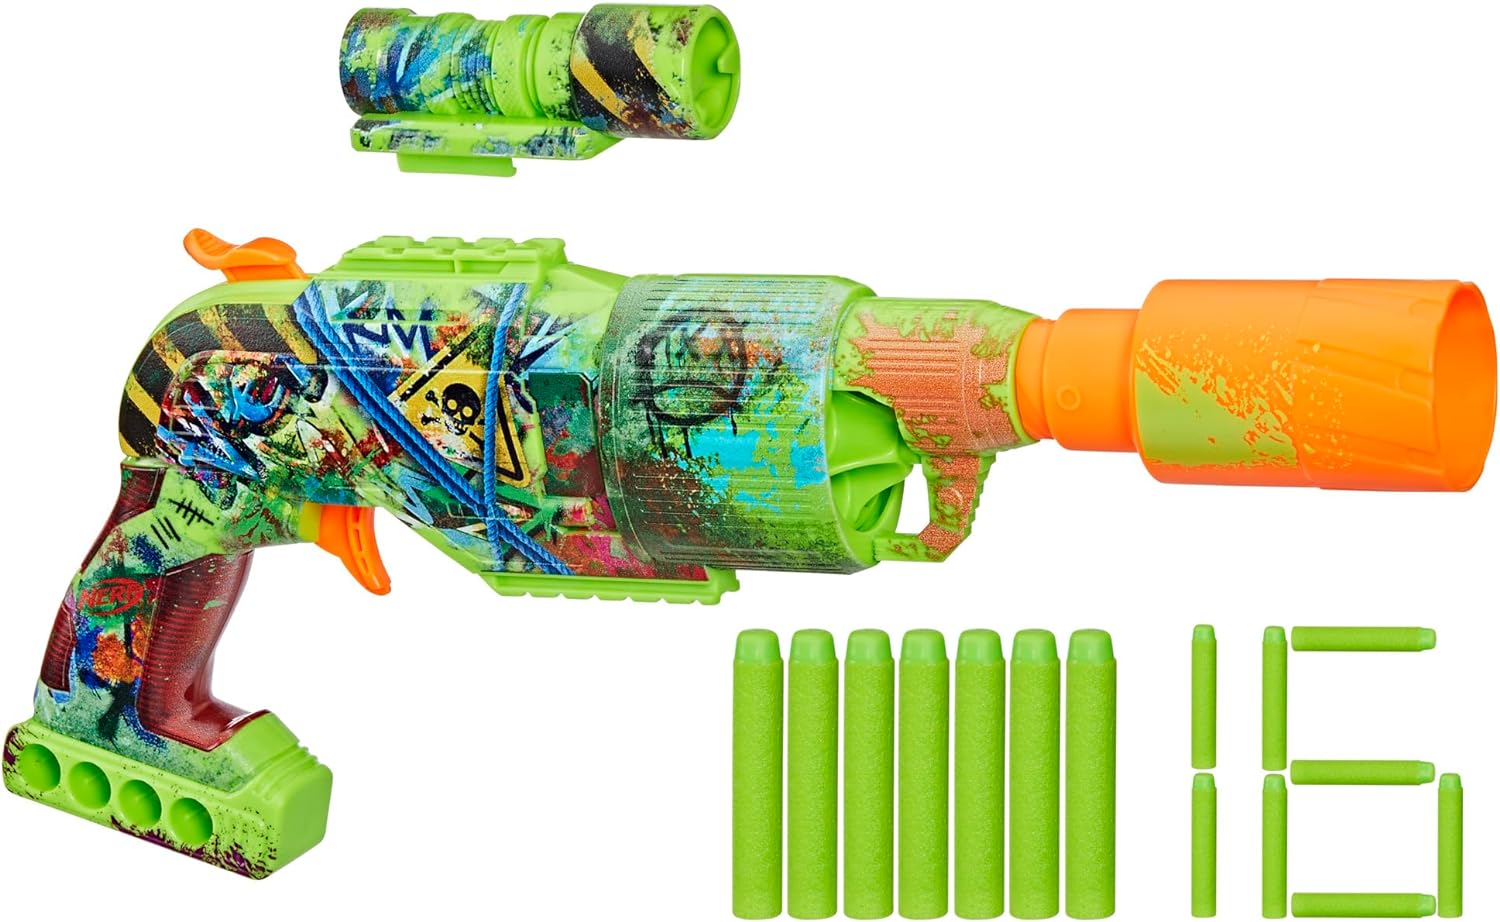 This is a really cool blaster! It' very fun and unique, but has that old school Zombie Strike feel to it as well as a sort of blend between a Hammershot and a Sweet Revenge. One of the unique things is that when you do prime the hammer back, it returns to the top, so it doesn't lock in place, which is kind of neat. Reloading is easy, and there' enough space to put two darts in at a time on each side. And the front attachment is wide enough to not cause any interference with the dart, while the